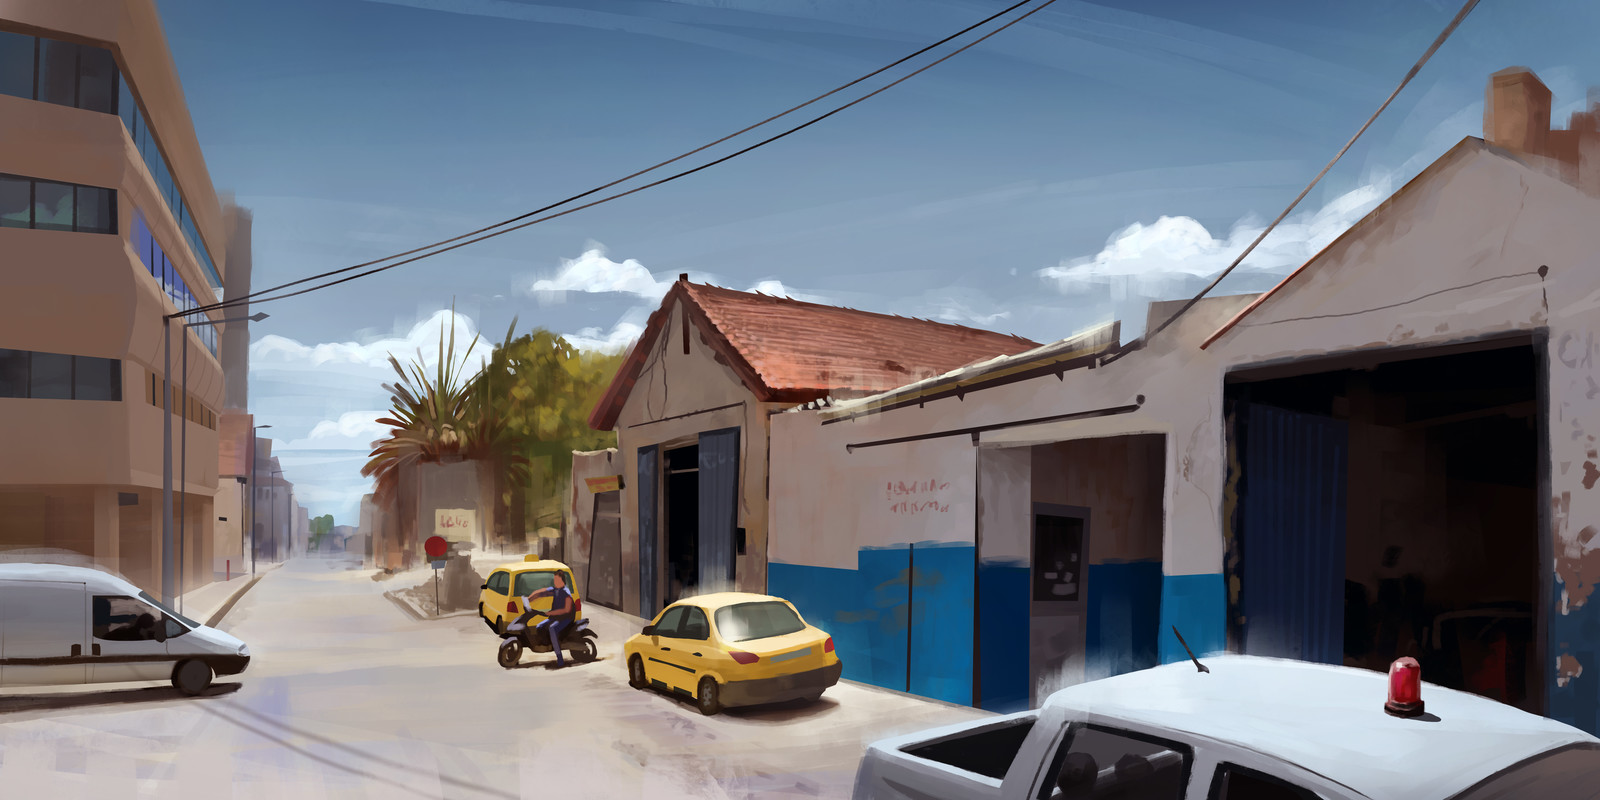 Did this after seeing some of Jeremy Fenske's stuff. Somewhere in Tunisia